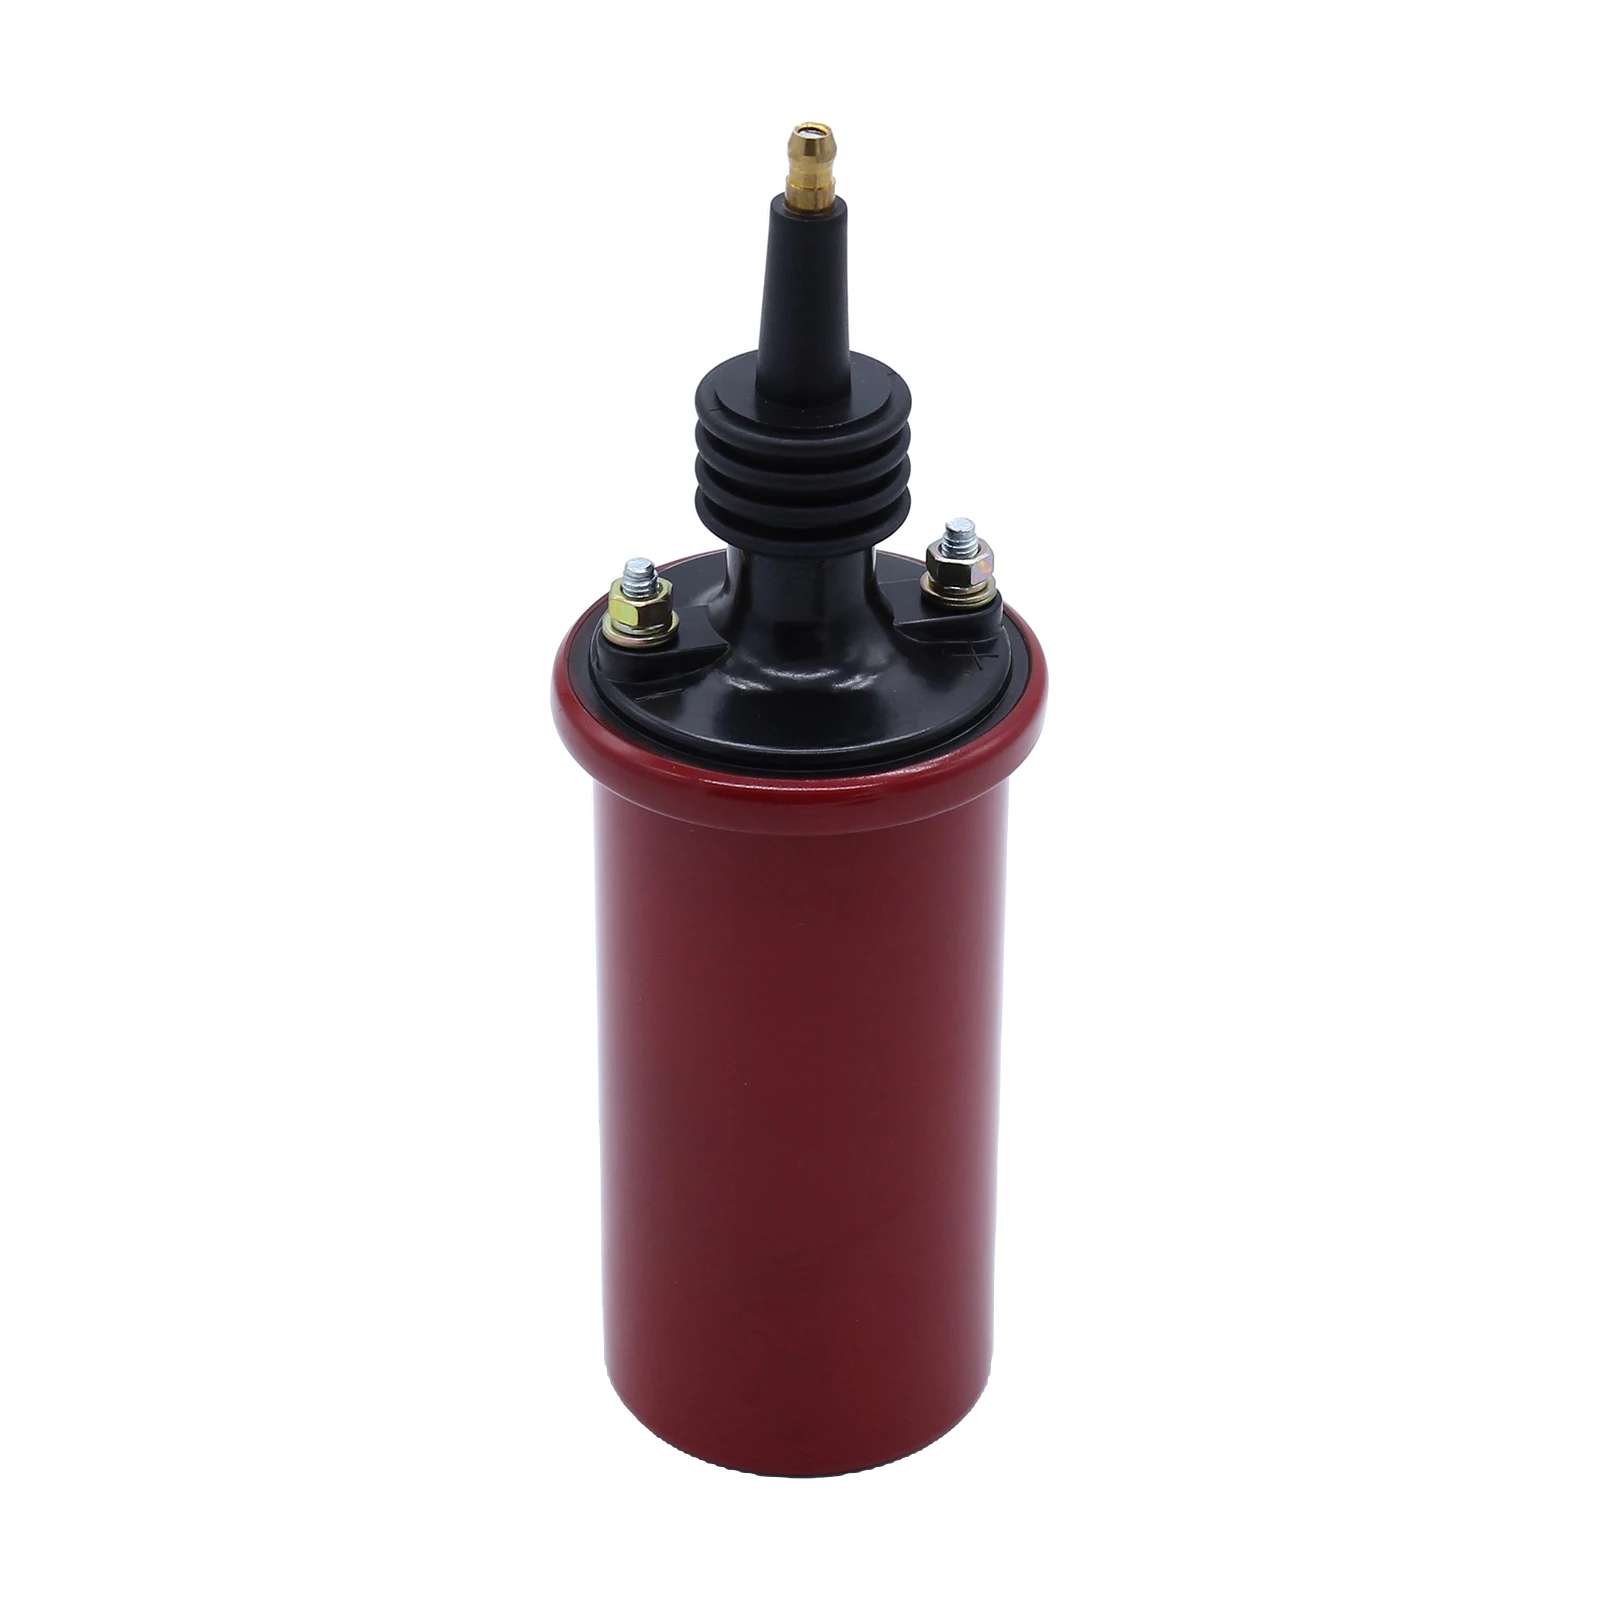 

Red Blaster 3 Oil Filled Coil Ignition Coil Canister Round without Label HEI-style Boot 45,000 Volts High Vibration 1 Piece